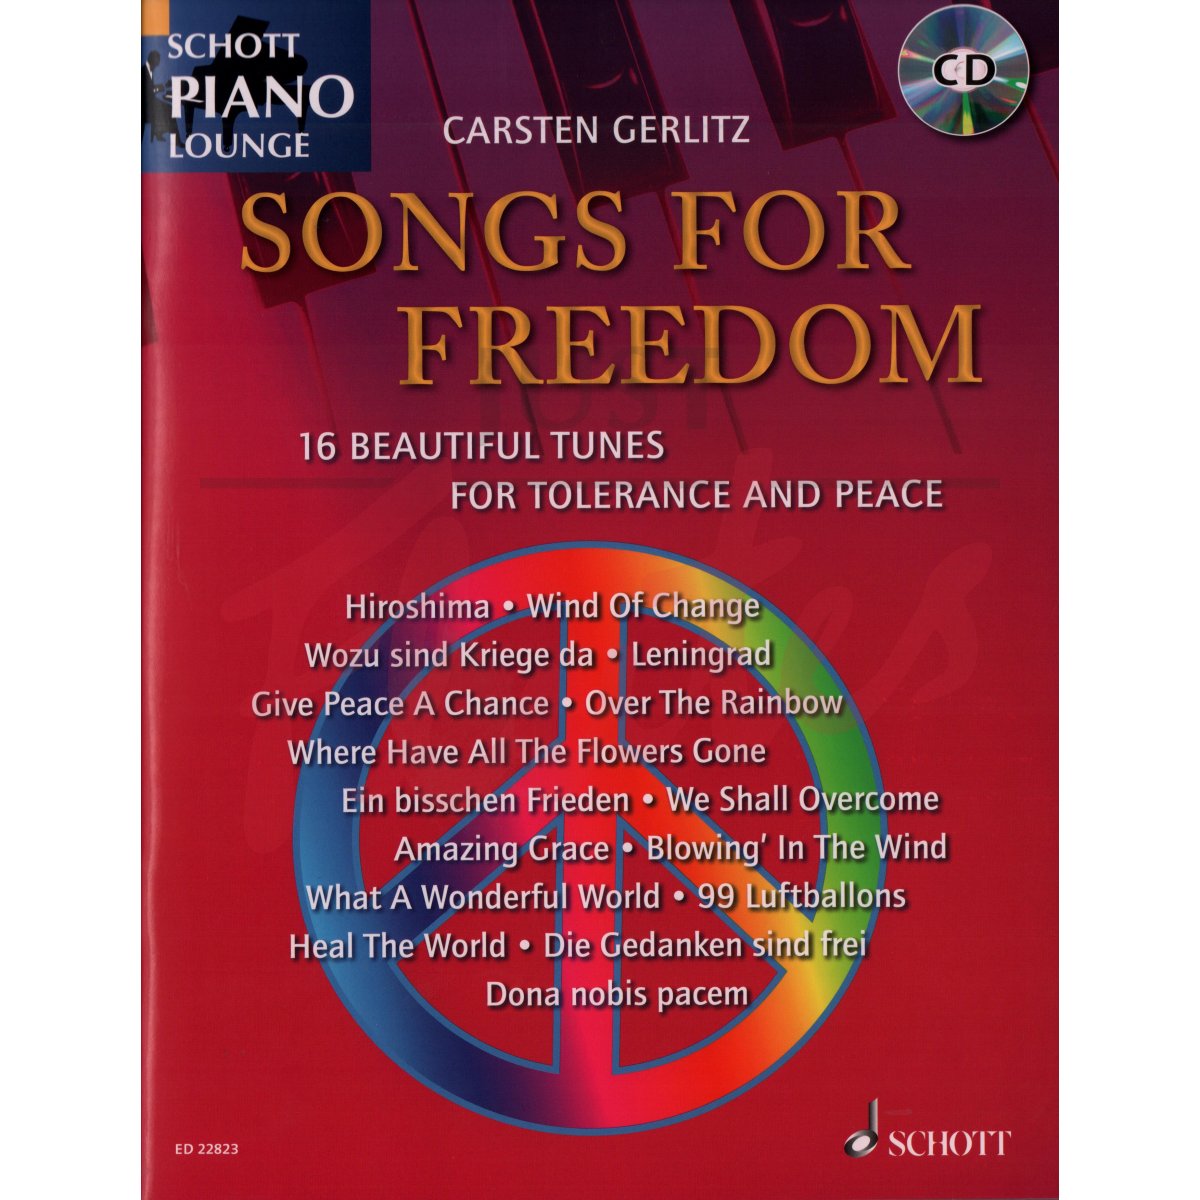 Songs for Freedom